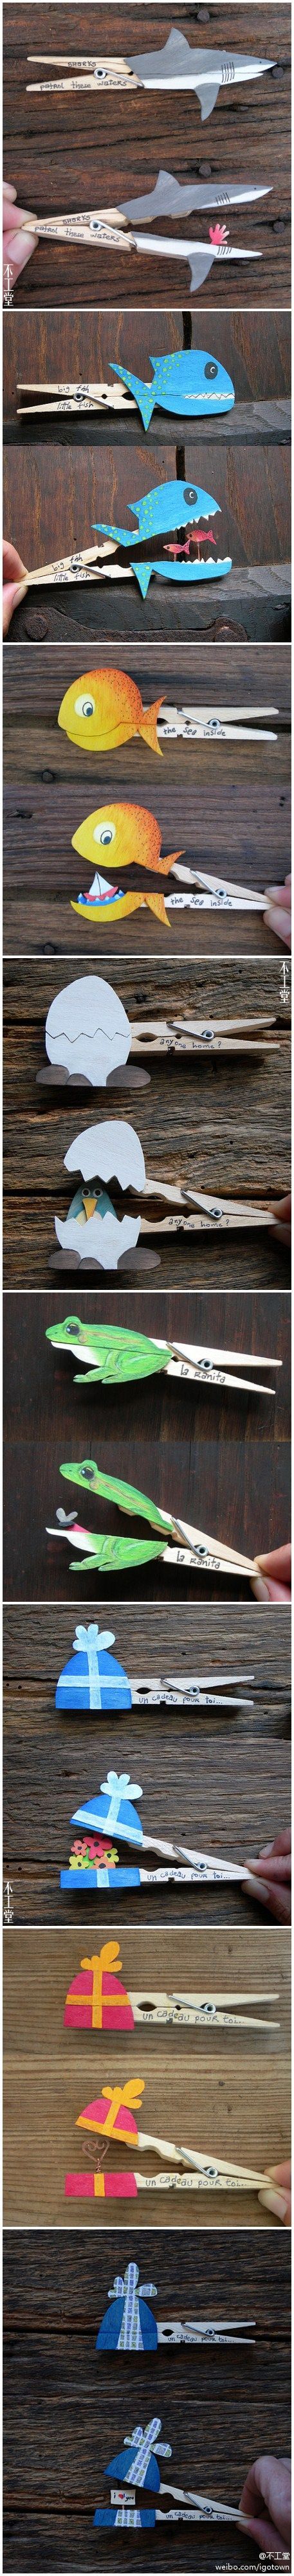 Fun craft for the kids.